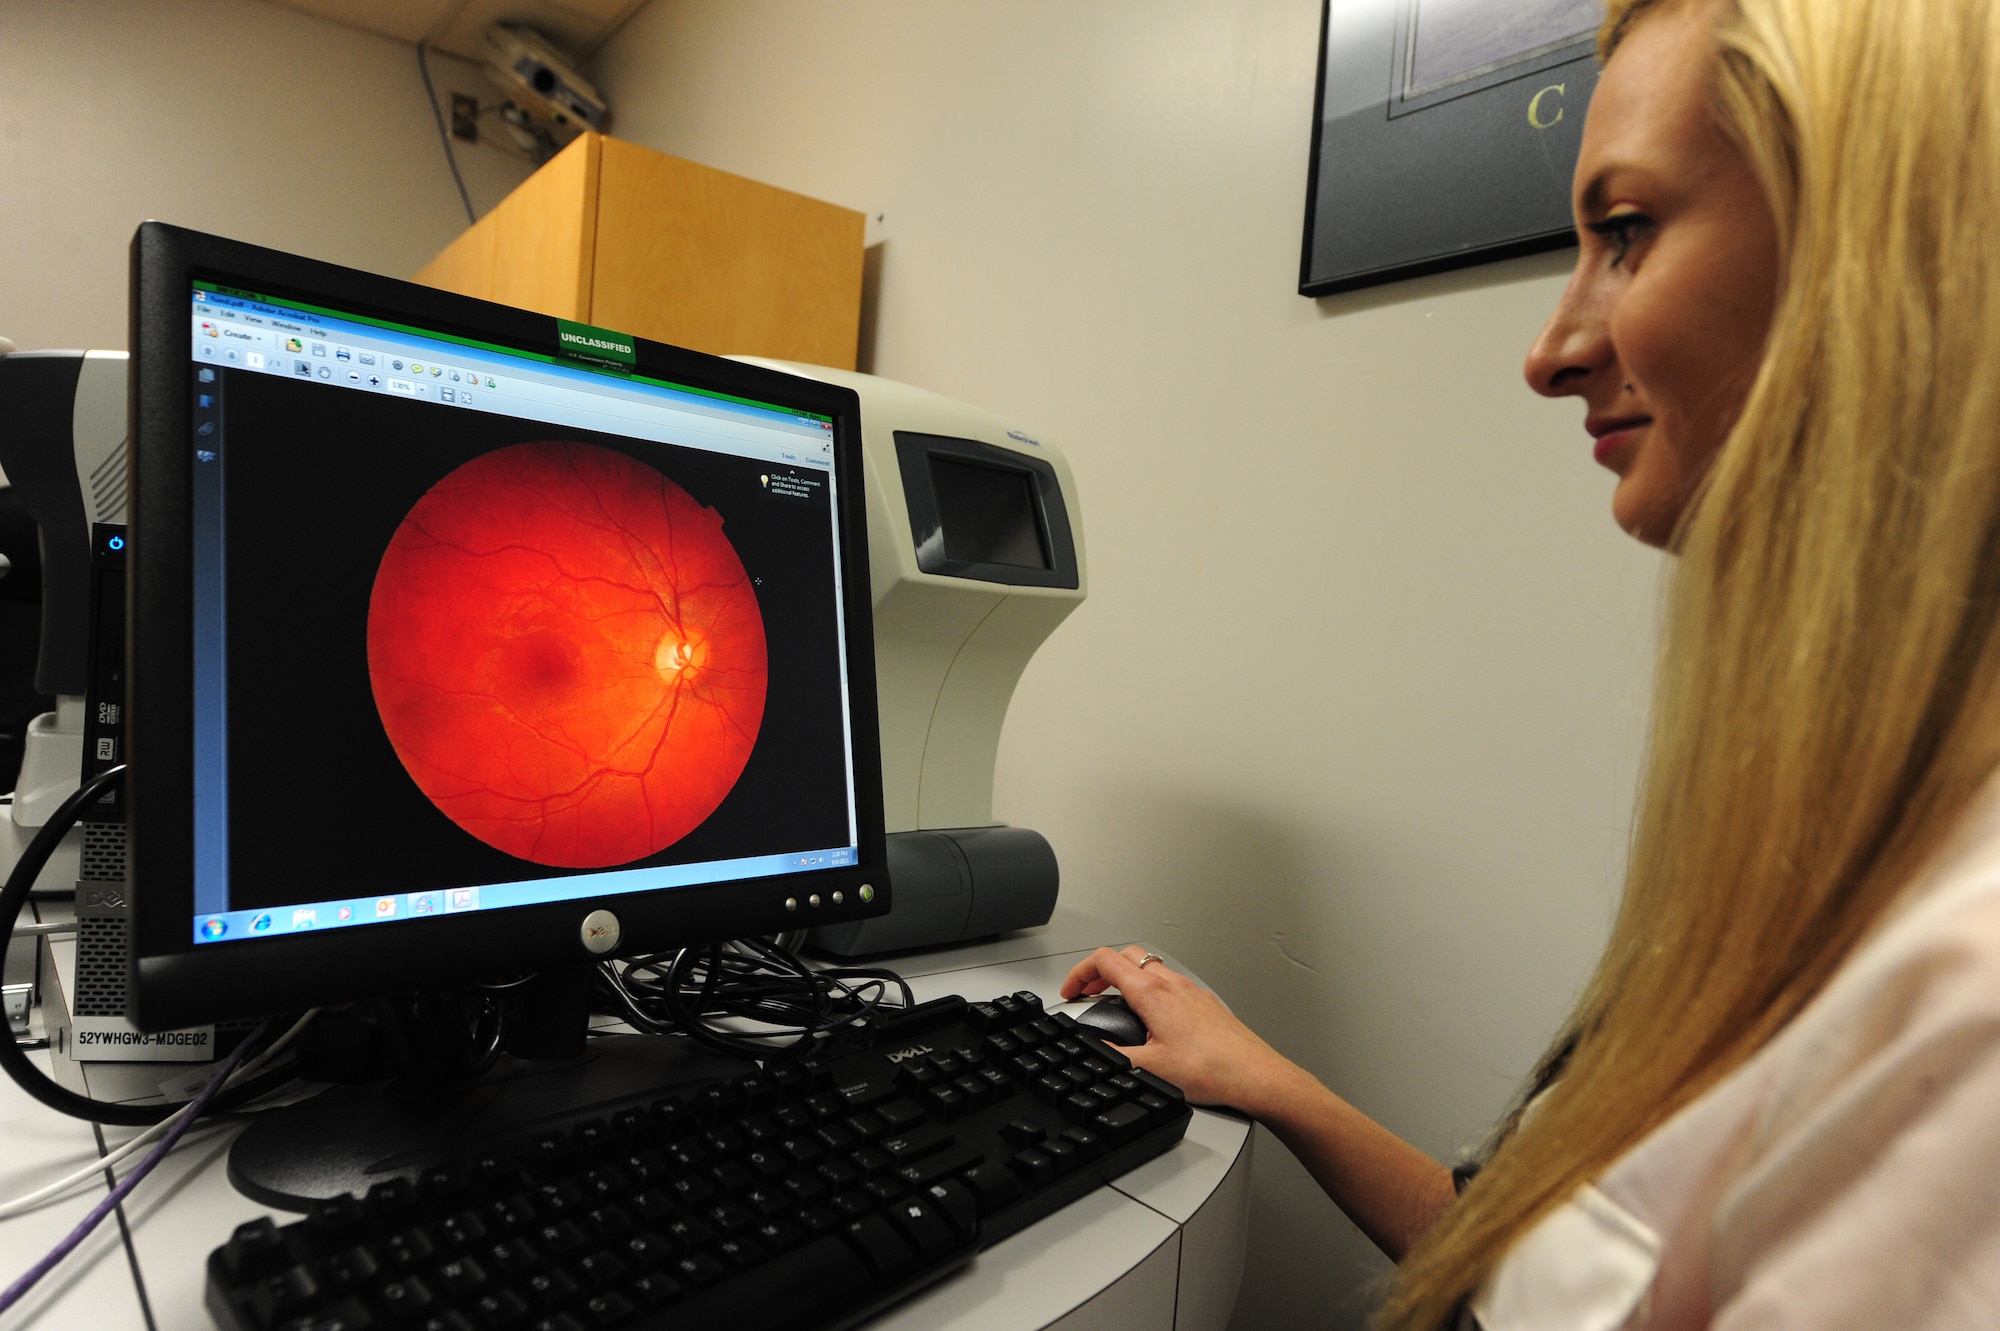 Alyssa White, 509th Medical Operations Squadron optometry technician, captures a picture of a patient’s retina in the optometry clinic at Whiteman Air Force Base, Mo., Sept. 4, 2013. The picture provides information that the optometrist uses to detect ocular disease. (U.S. Air Force photo by Staff Sgt. Nick Wilson/Released)